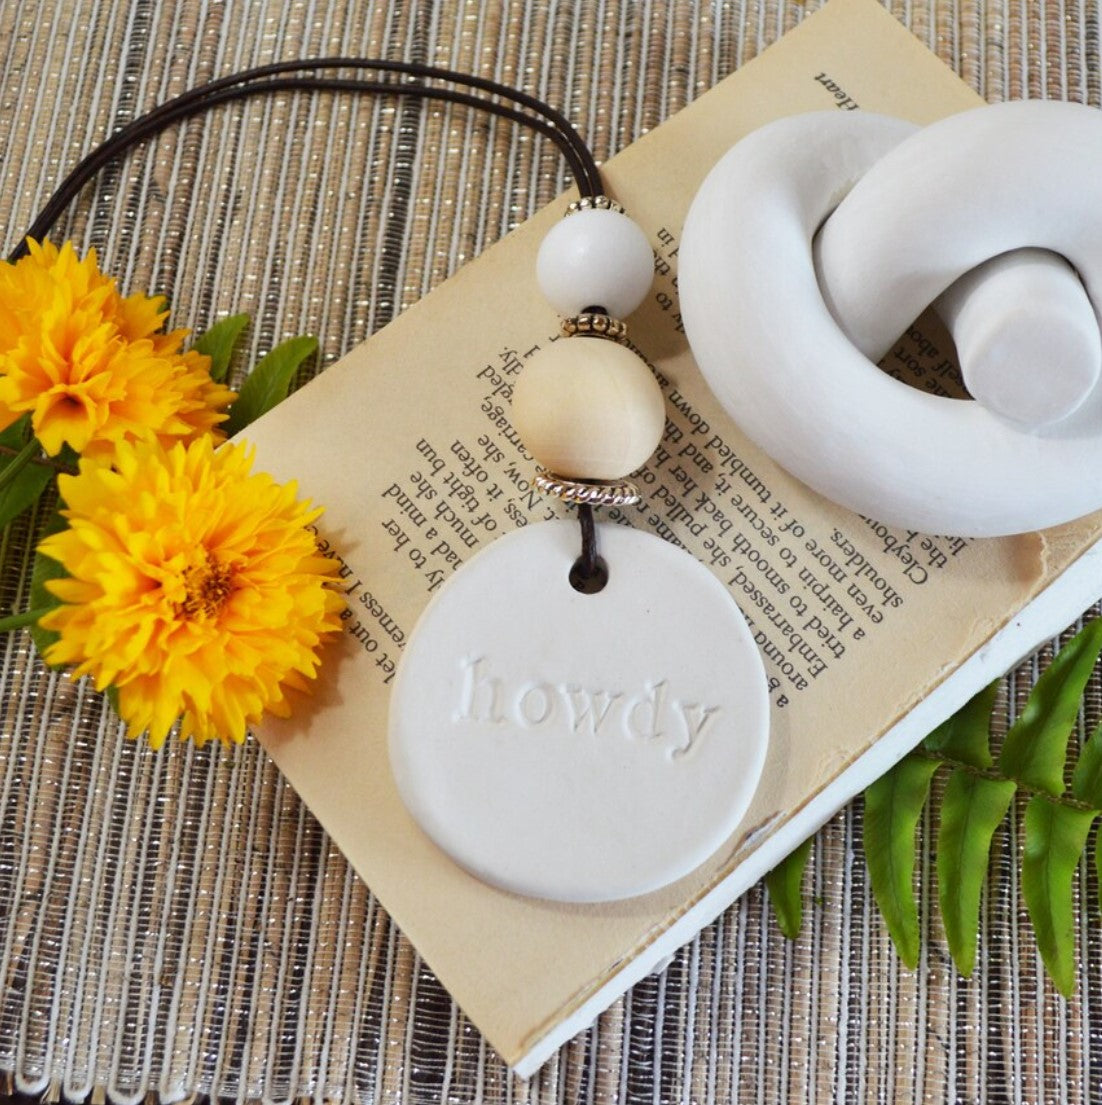 Essential oil diffuser car charm for your ride, gift for friend/ Hippie boho Rear view mirror ornament decor / ~~ howdy ~~